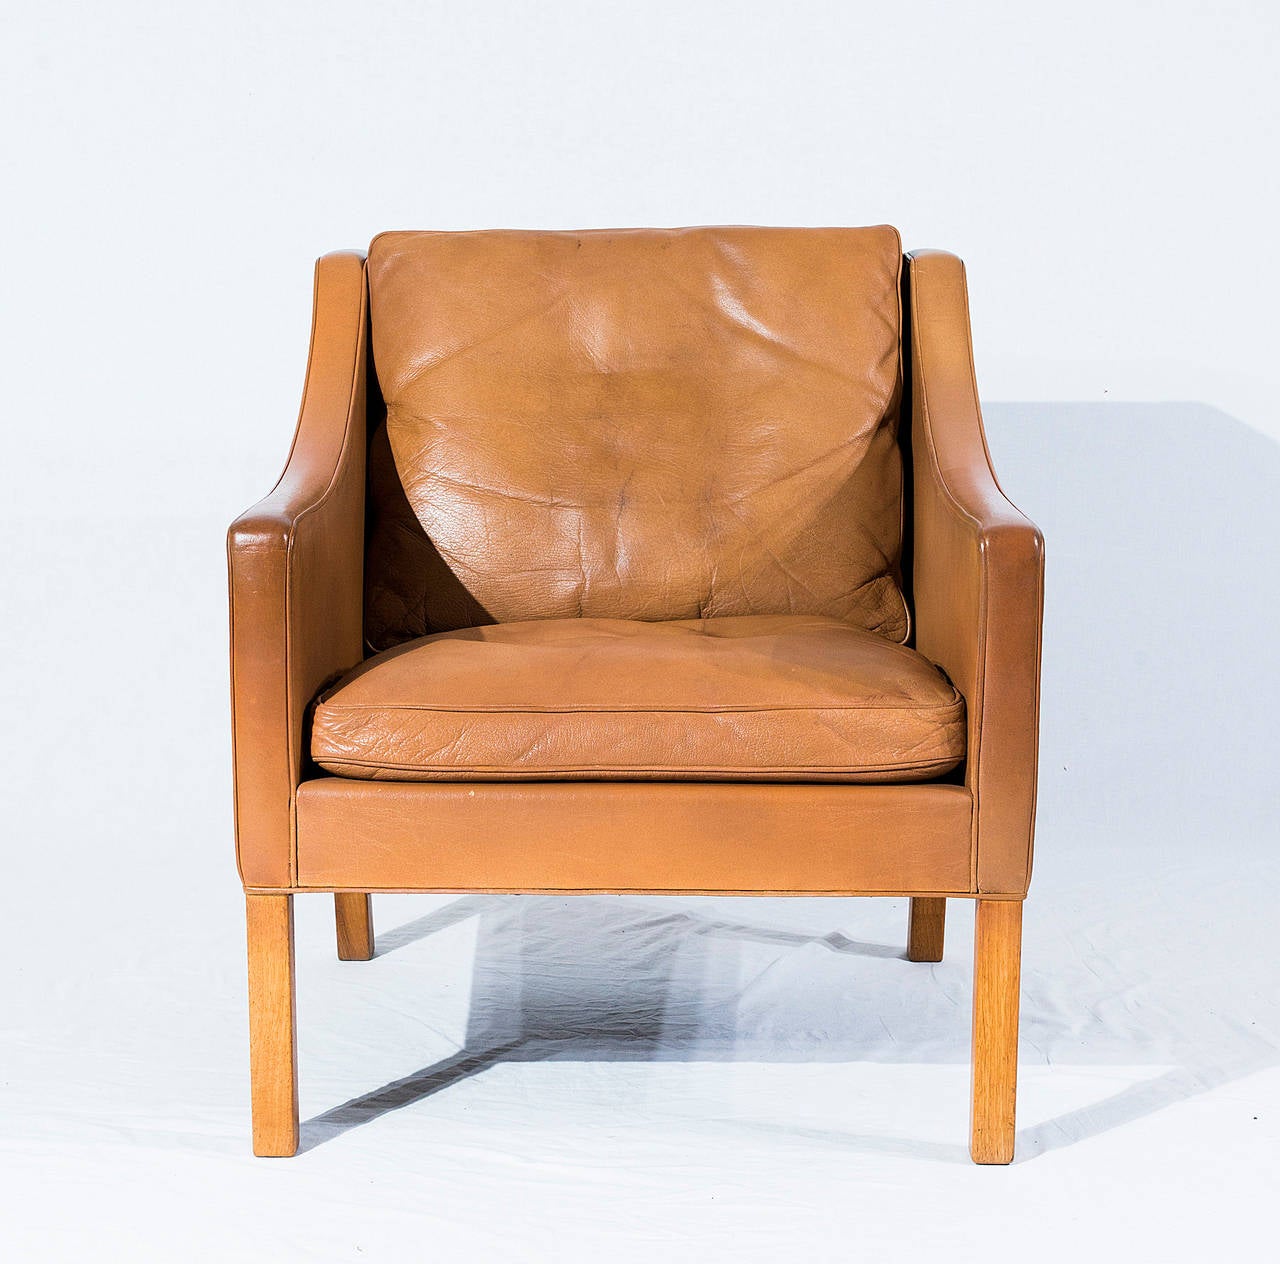 Børge Mogensen Model no. 2207 Leather Lounge Chair Designed in 1963 and Produced by Fredericia Stolefabrik.  Store formerly known as ARTFUL DODGER INC